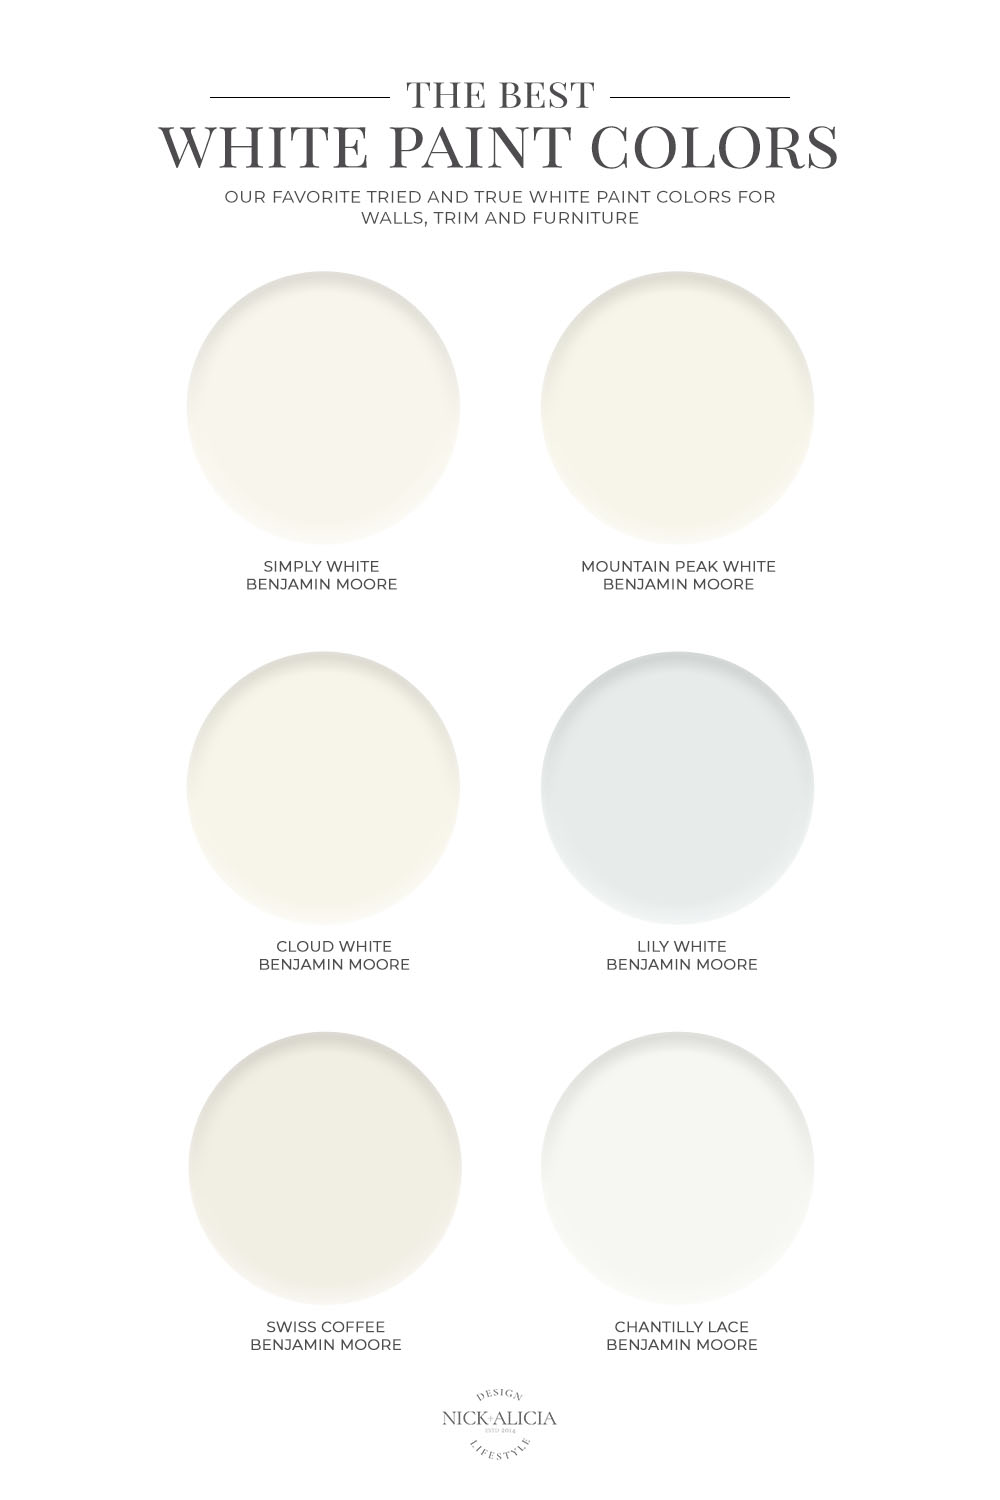 The Best White Paint Colors - Nick + Alicia